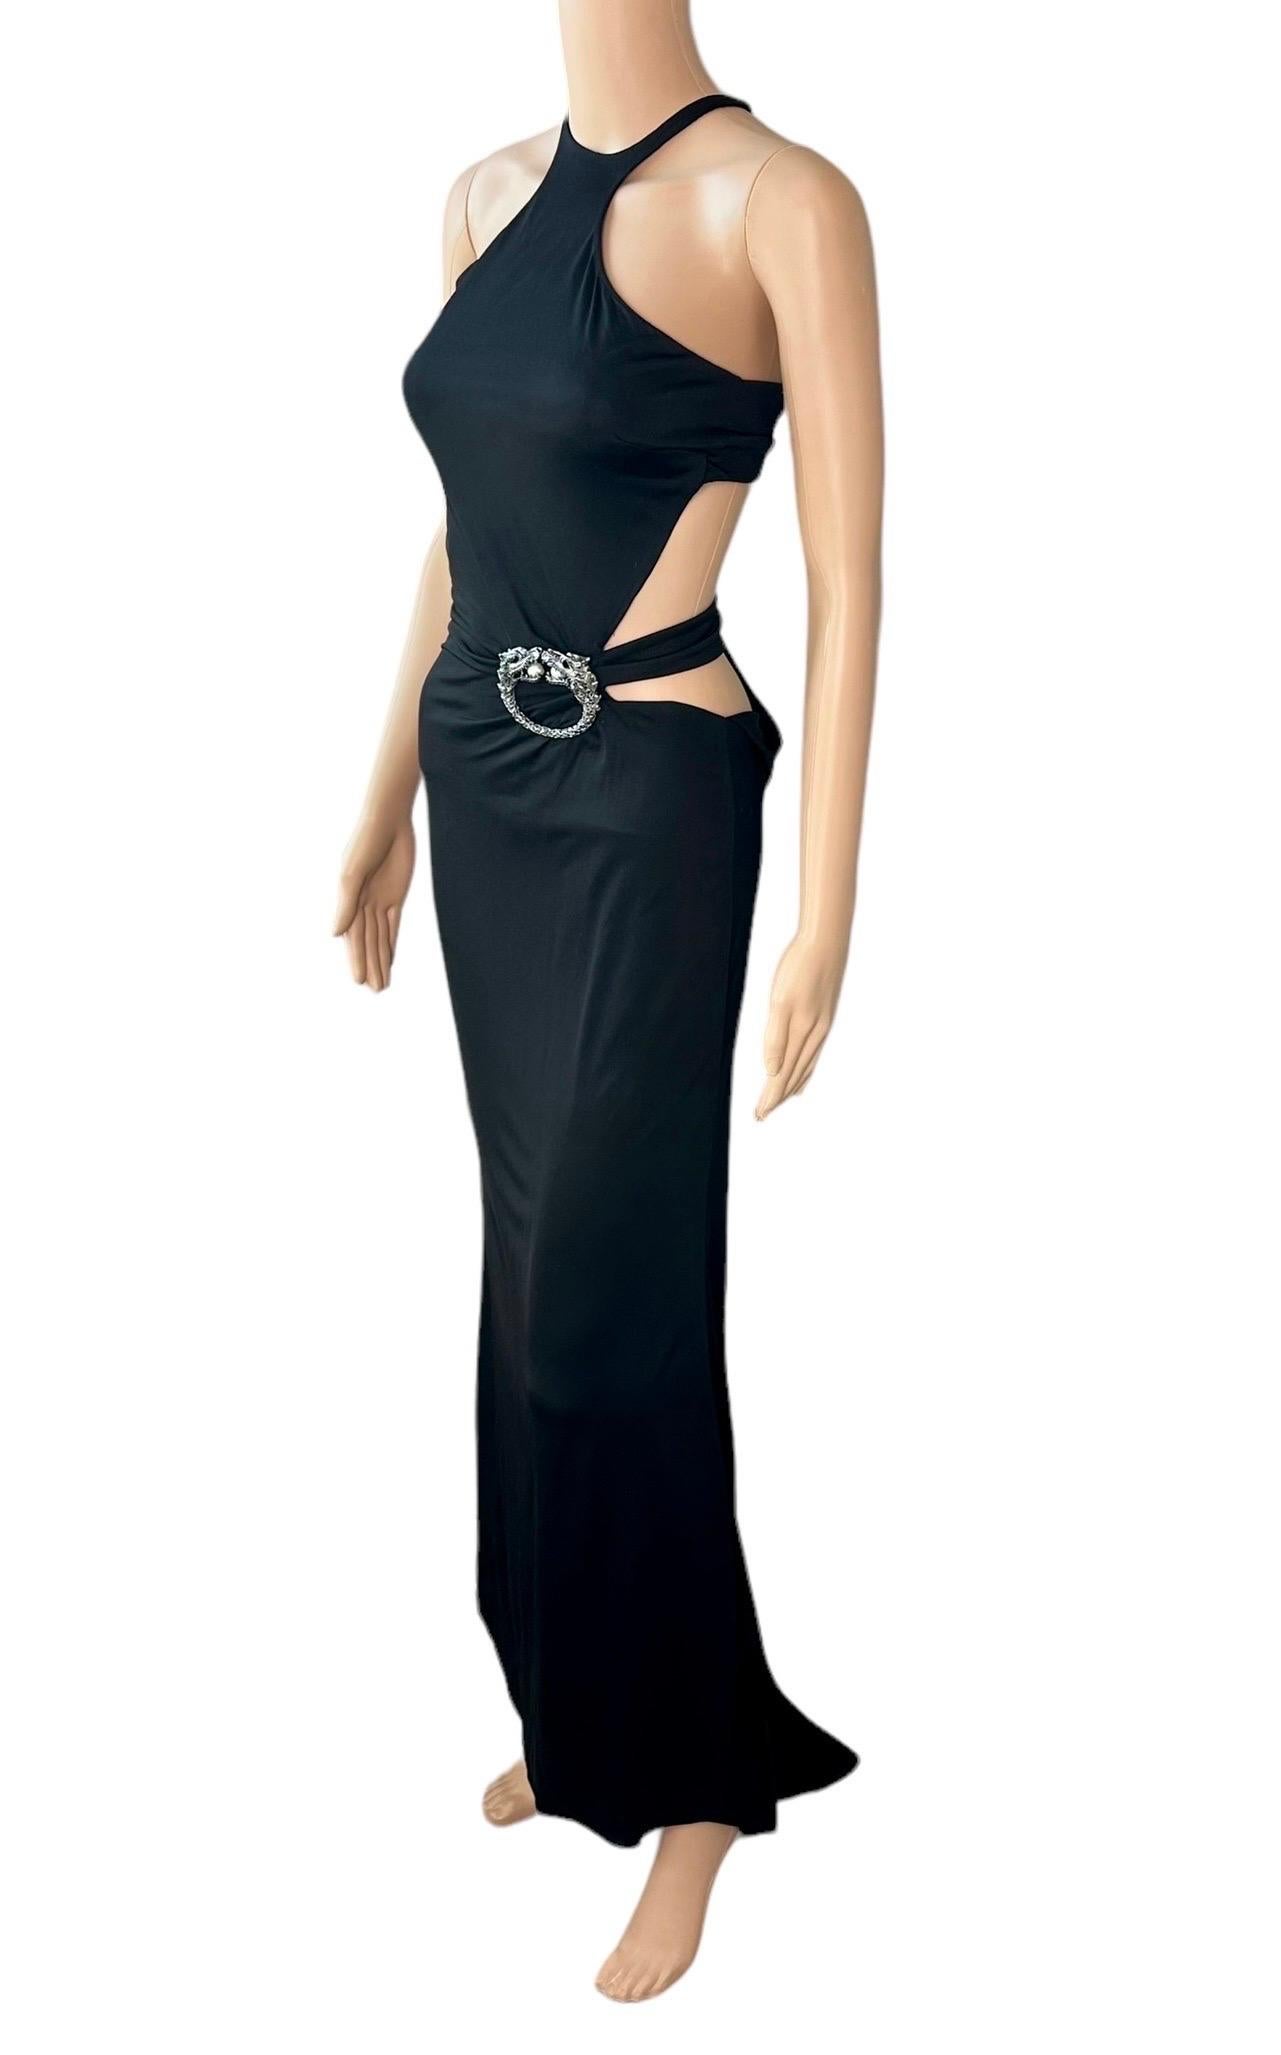 Tom Ford for Gucci F/W 2004 Runway Embellished Plunging Cutout Black Evening Dress Gown IT 42

Finale Look 42 from Fall 2004 Collection in the white color.



